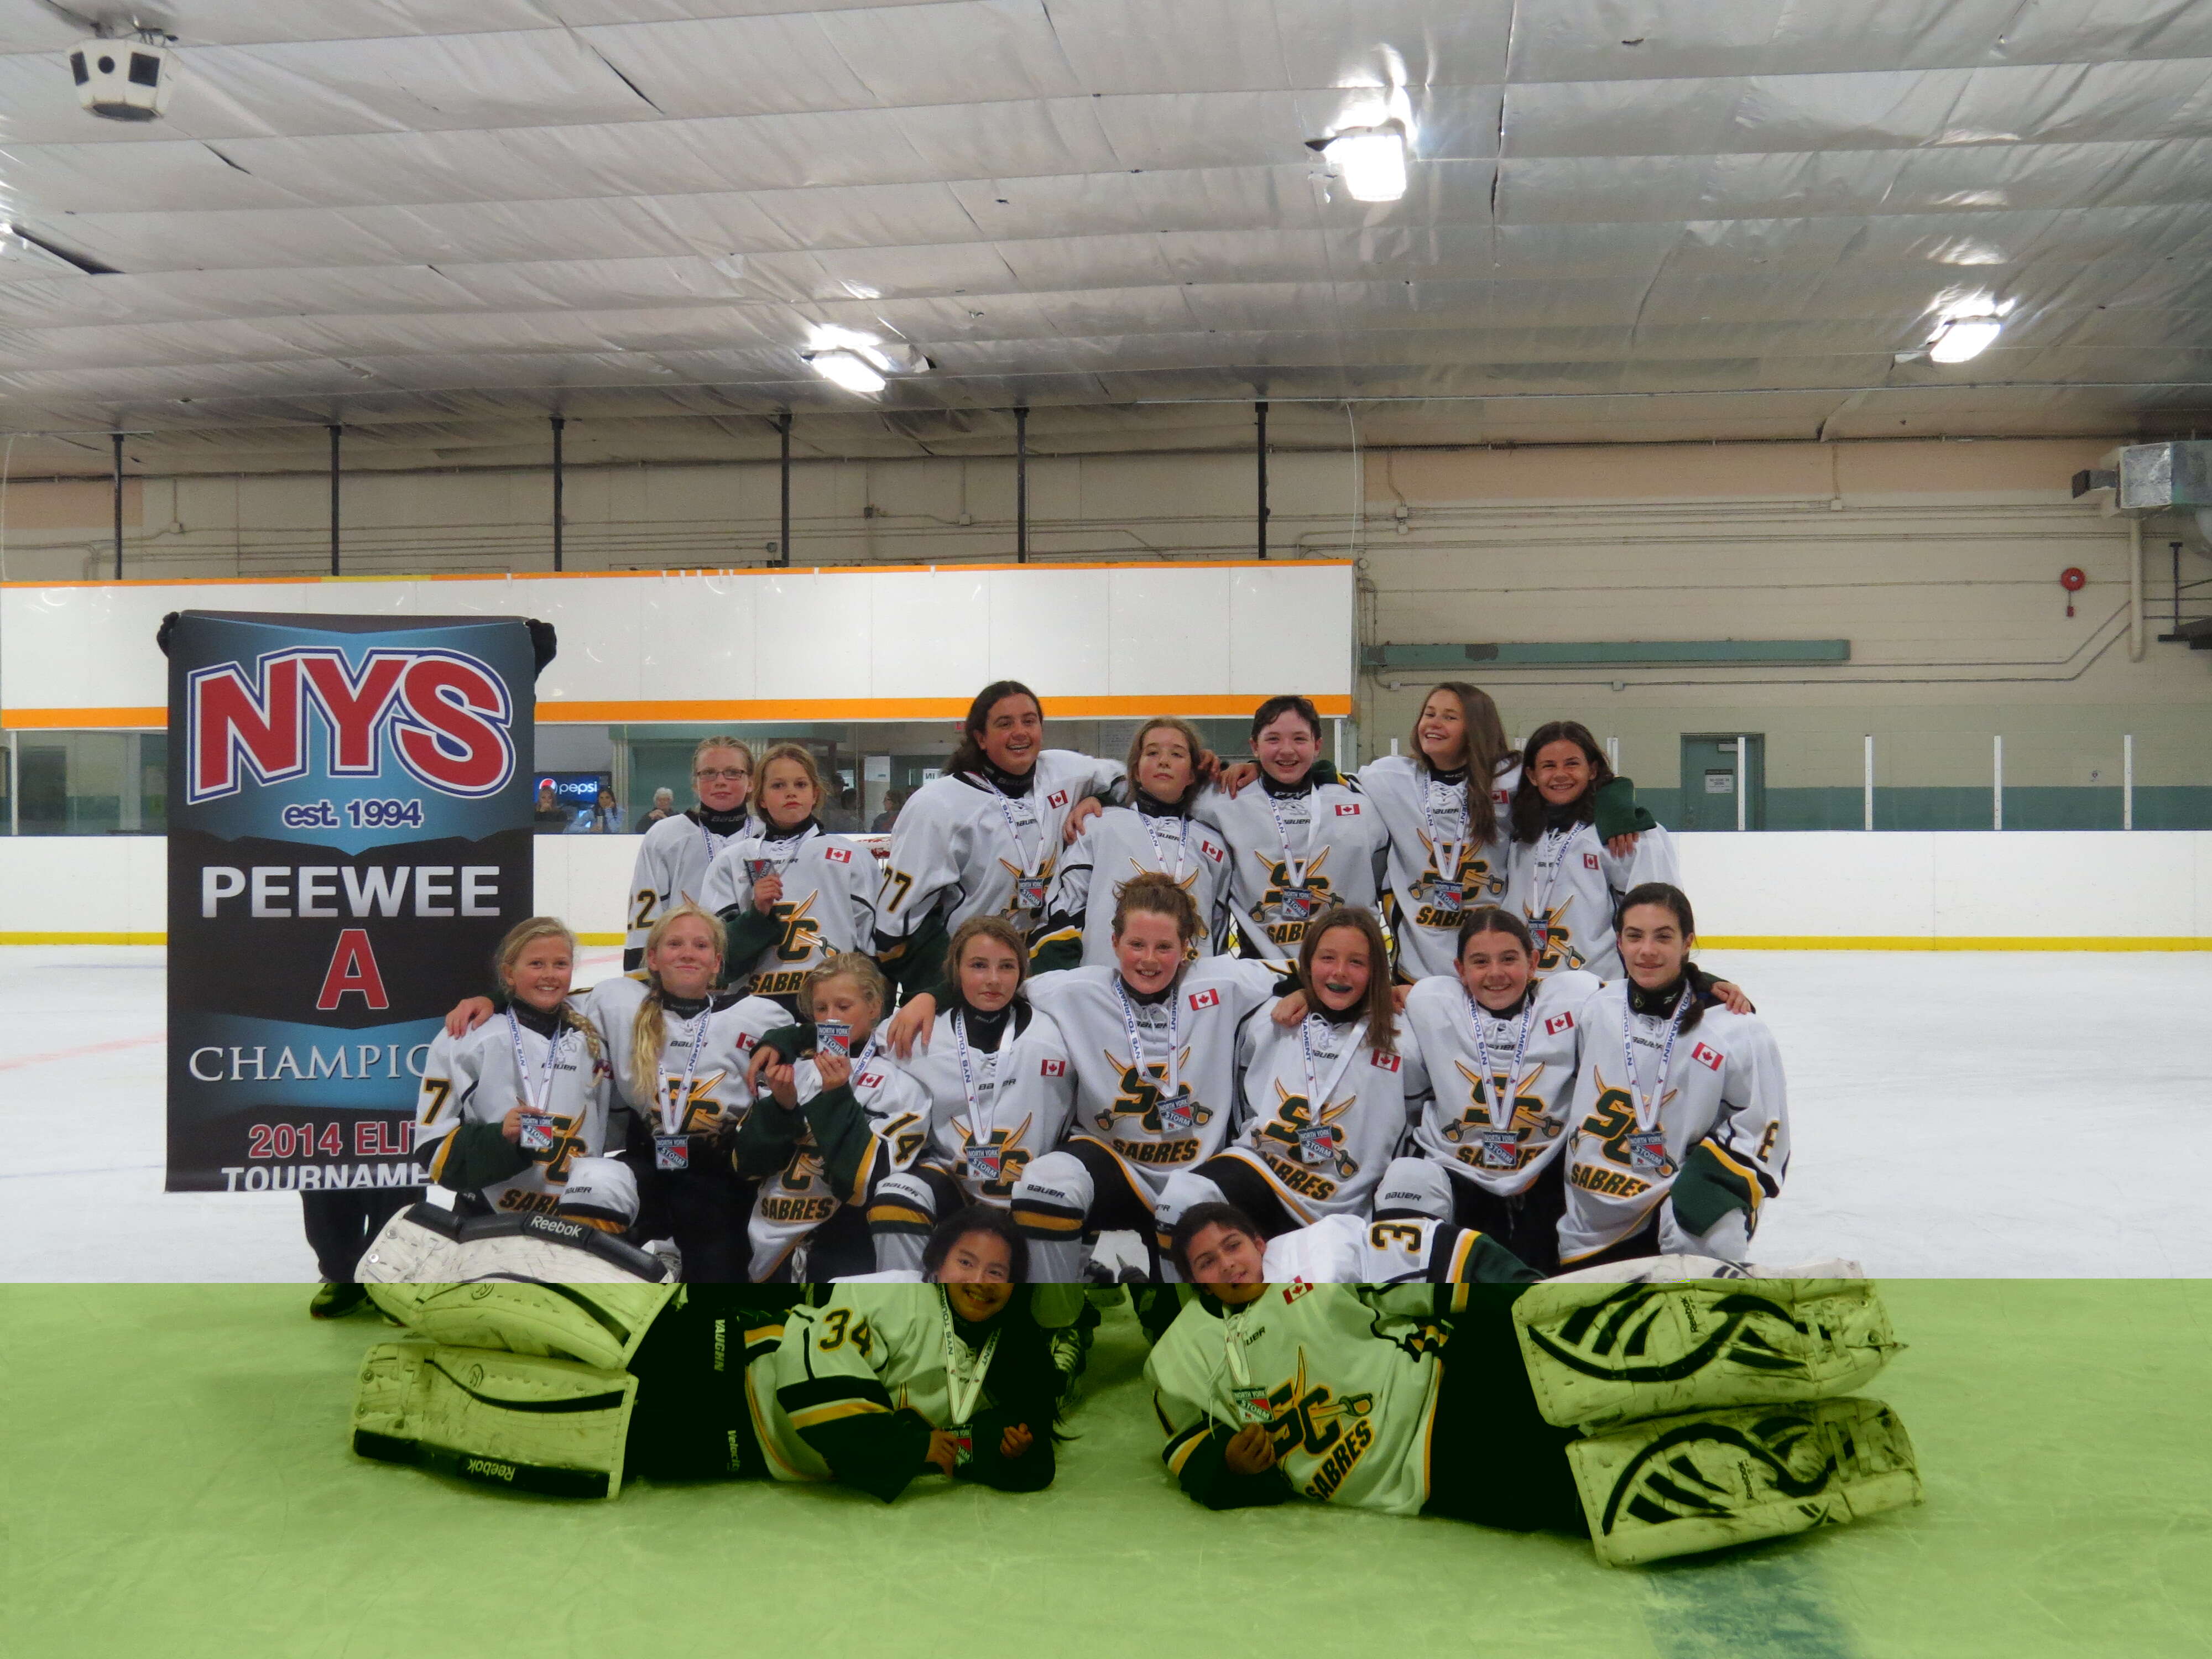 Peewee A - NYS - Gold Medalists